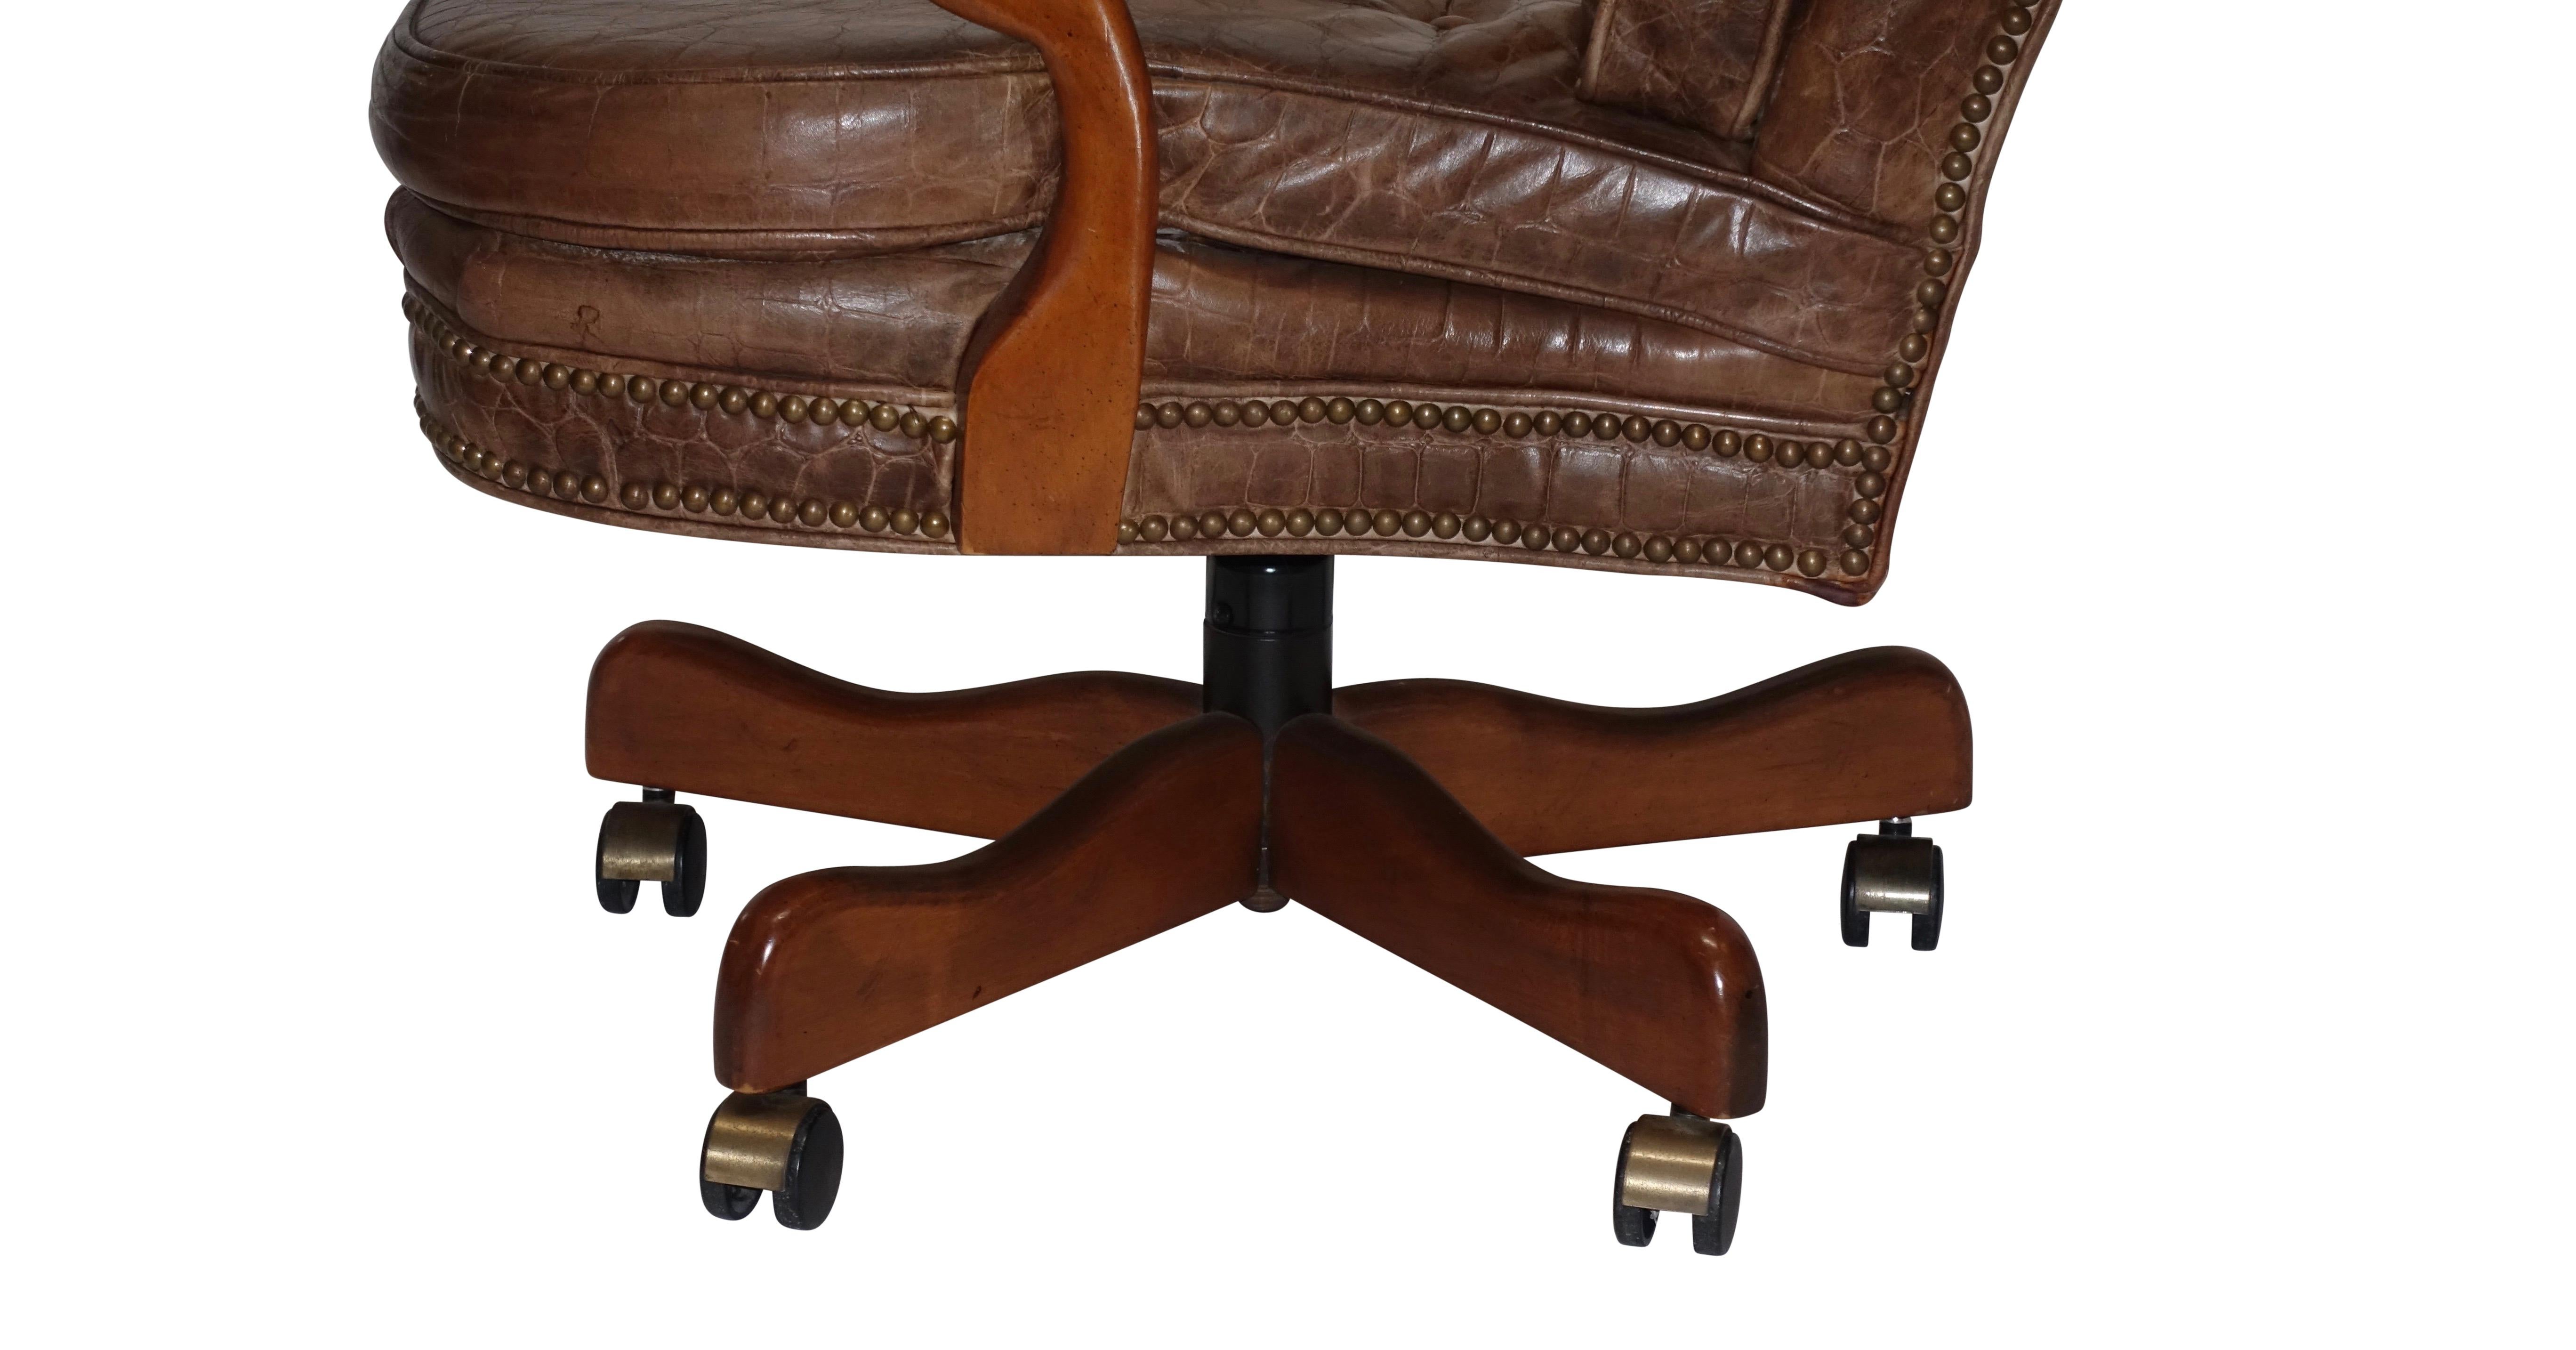 American Executive Desk Chair with Alligator Embossed Leather